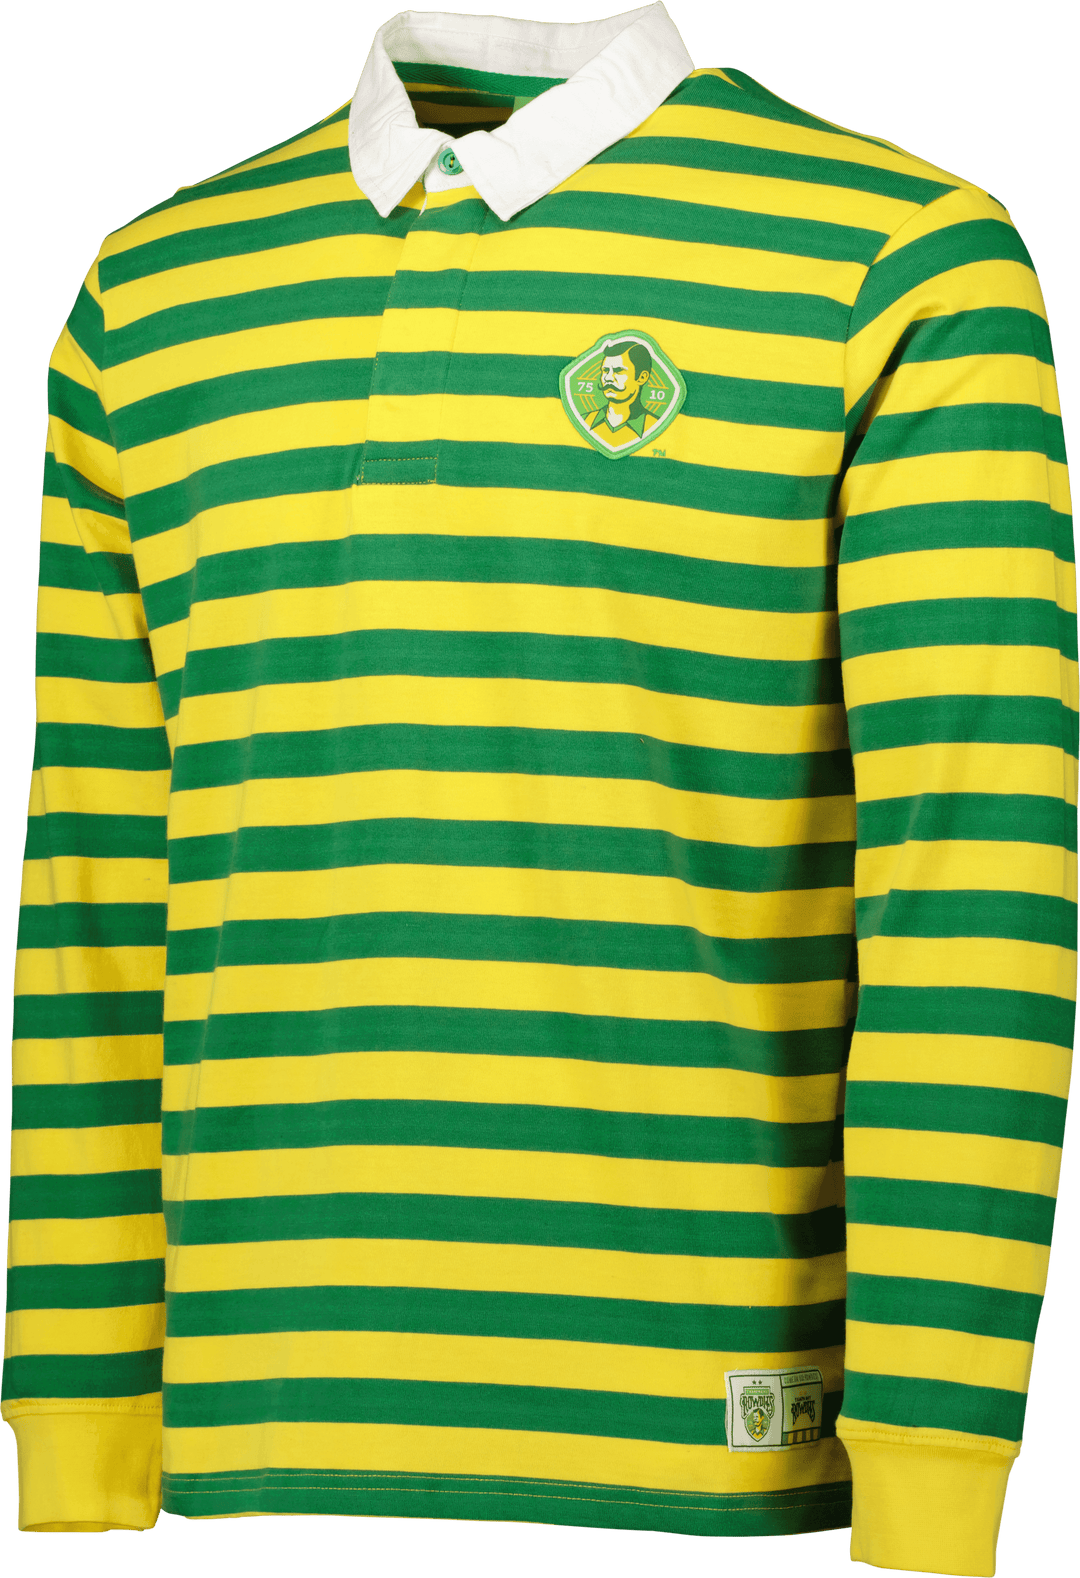 ROWDIES MEN'S YELLOW AND GREEN STRIPED CREST LONG SLEEVE POLO - The Bay Republic | Team Store of the Tampa Bay Rays & Rowdies